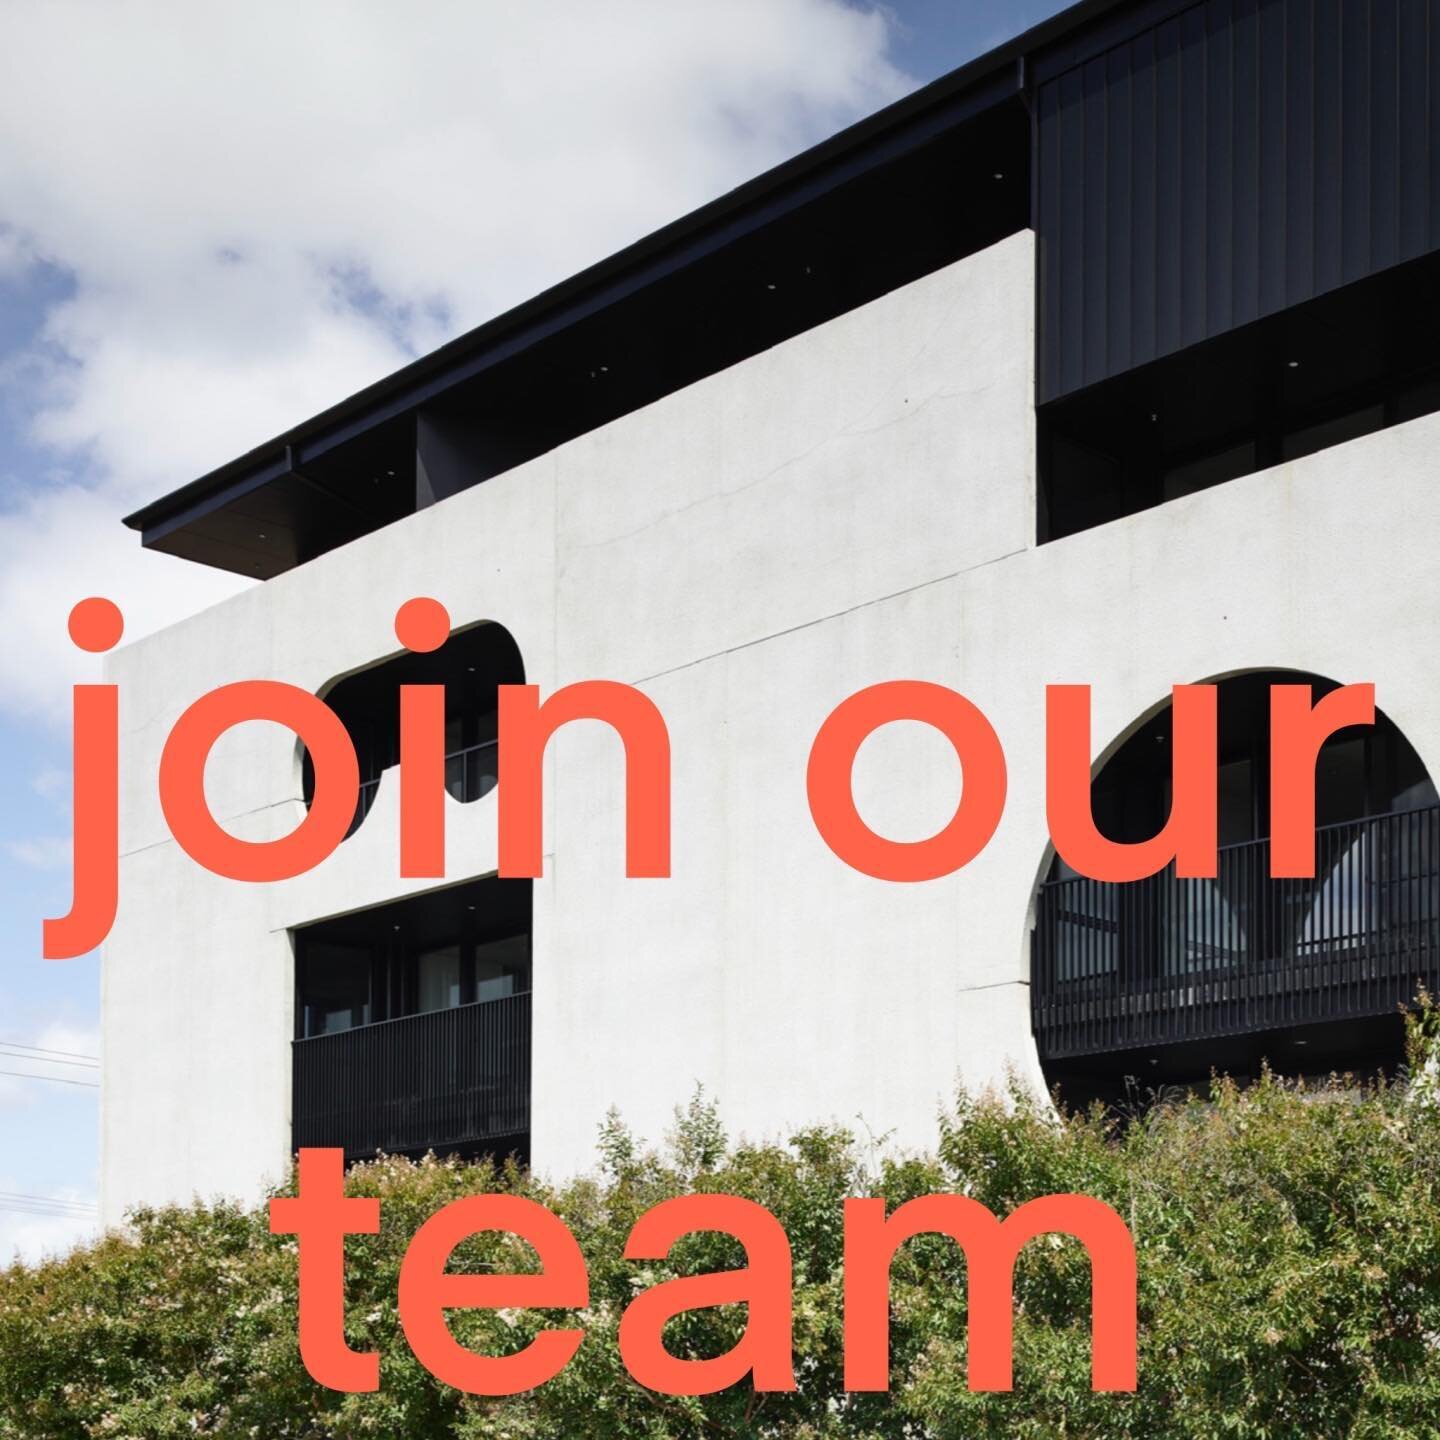 Kennedy Nolan is seeking an Architect with interest and experience in the design and documentation of Multi-Residential Projects
.
Archicad skills preferred
.
We have some very exciting projects coming up &amp; are keen to find a person with the pass